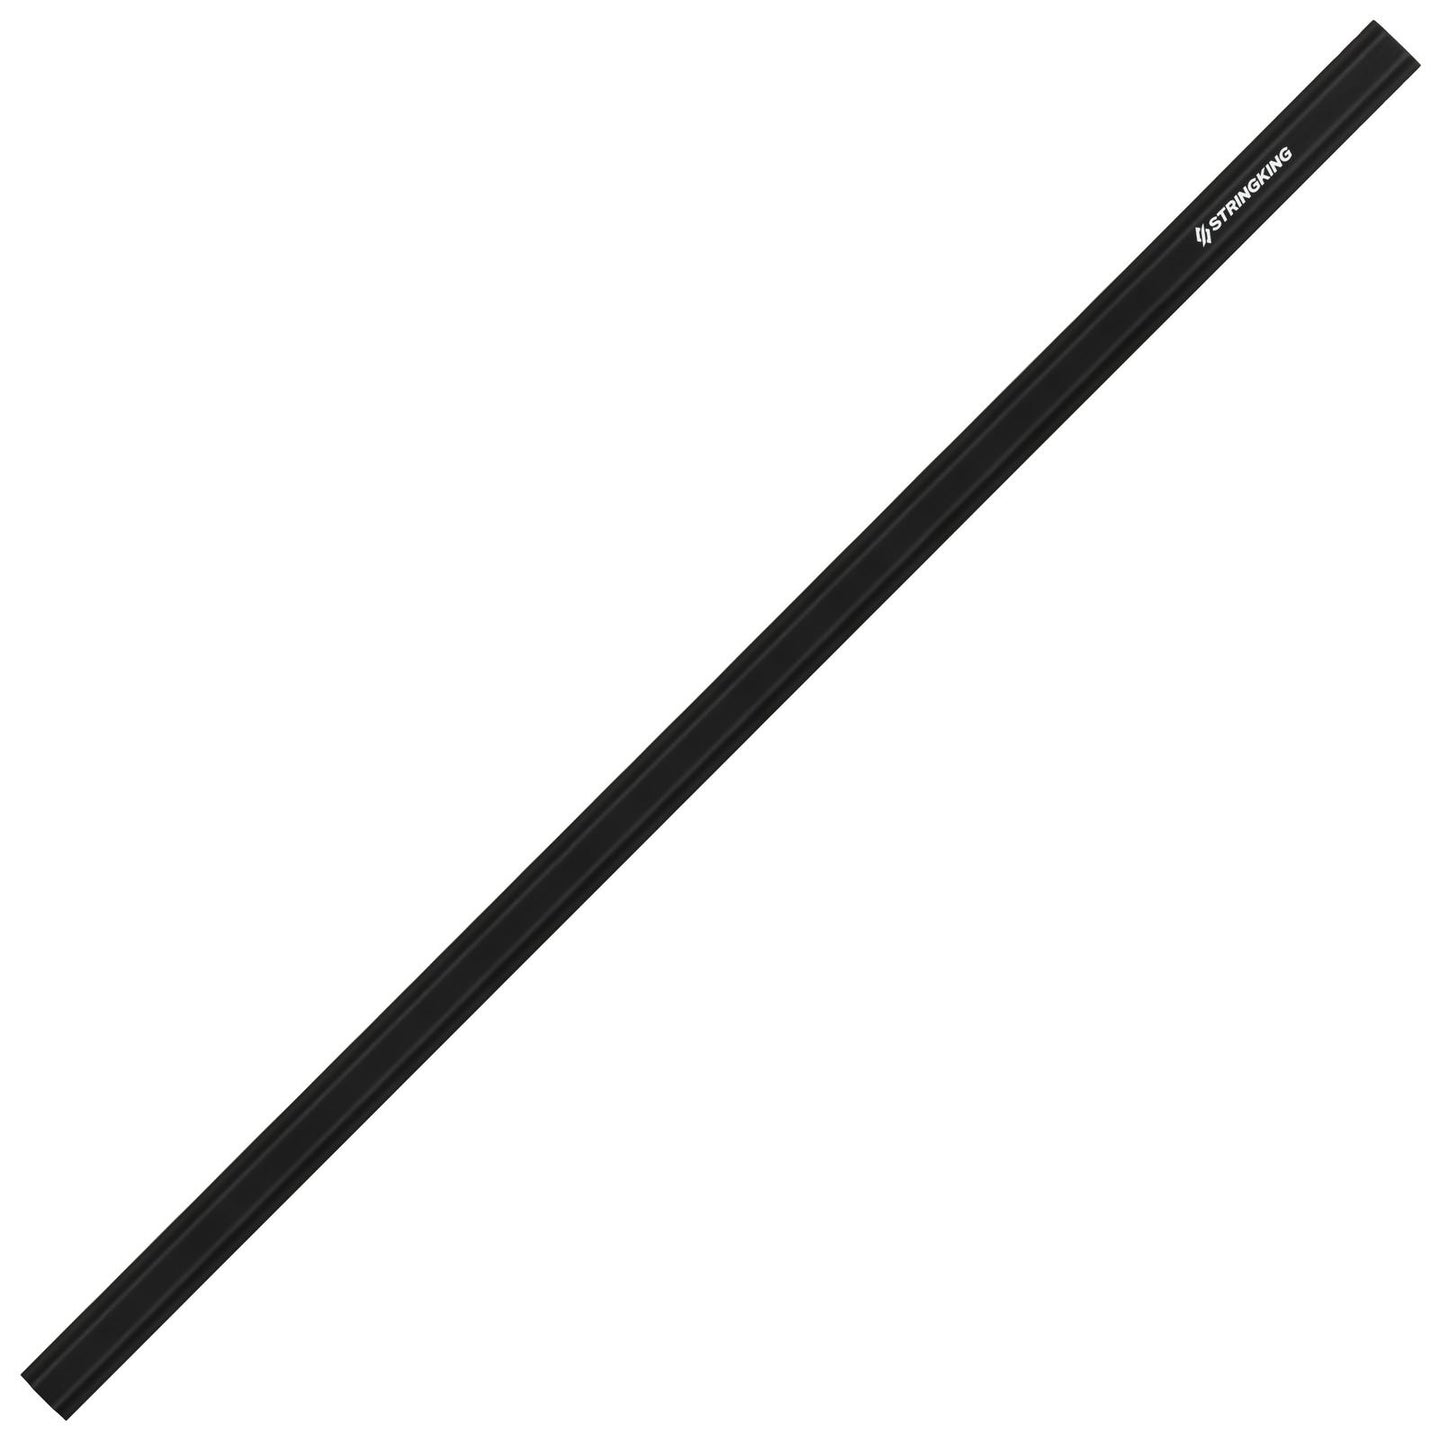 Picture of the black StringKing Composite 2 Pro Attack Lacrosse Shaft